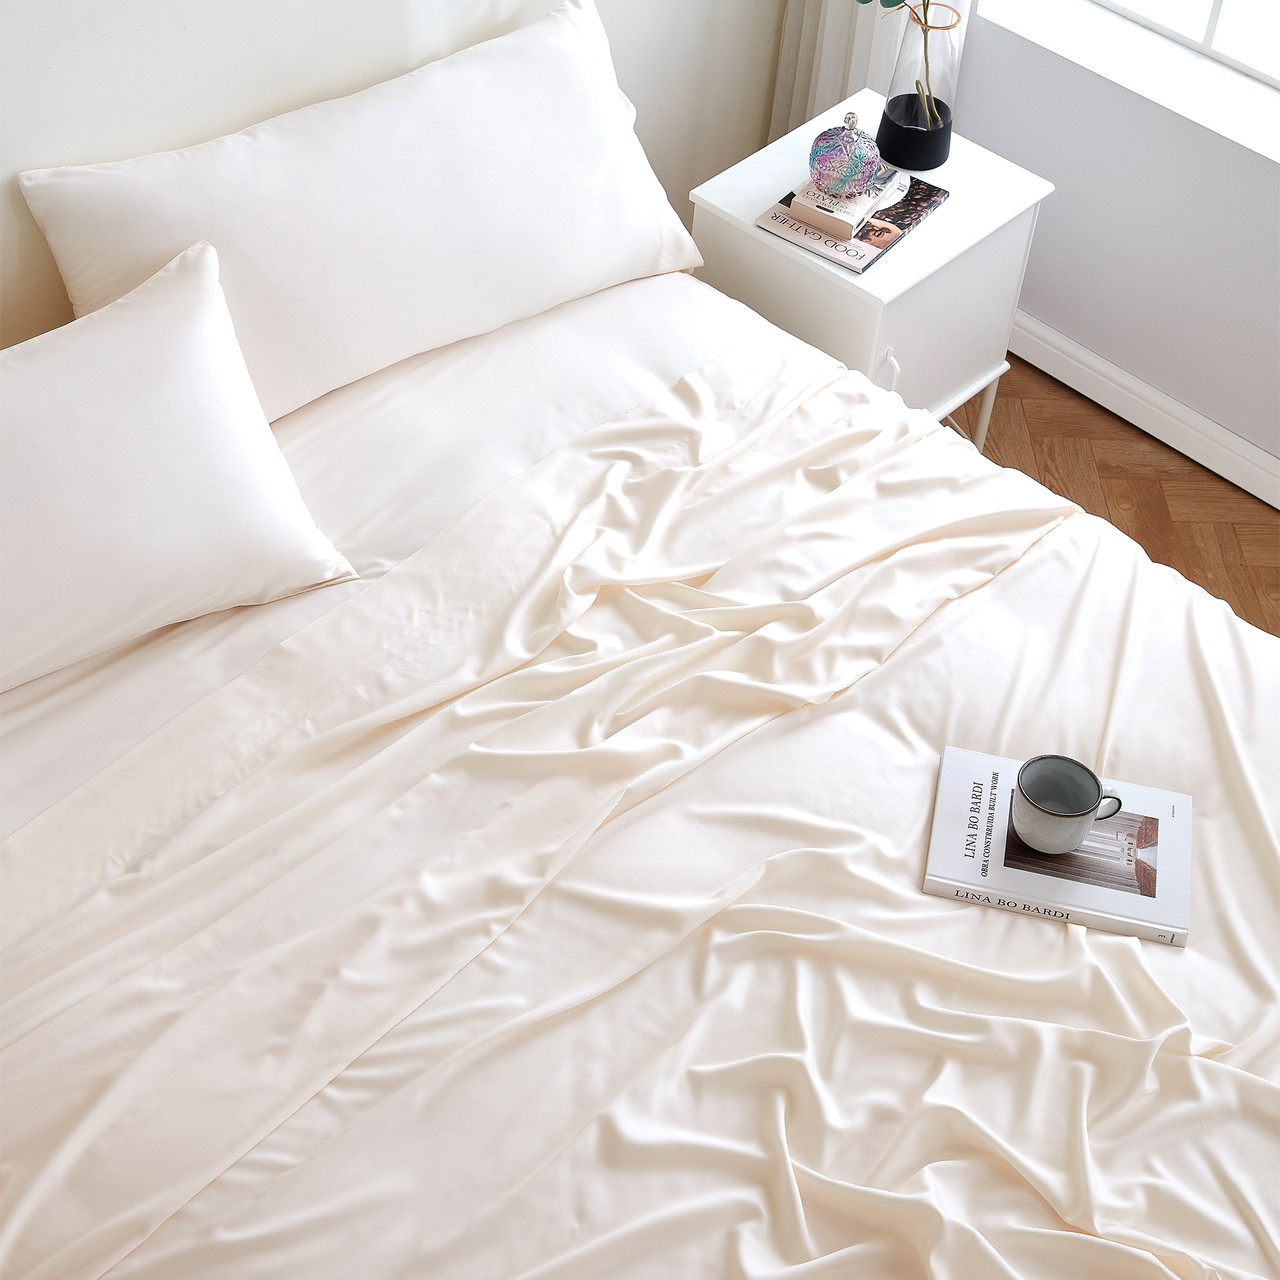 Snorze Cloud Comforter - Coma Inducer Ultra Cozy Bamboo